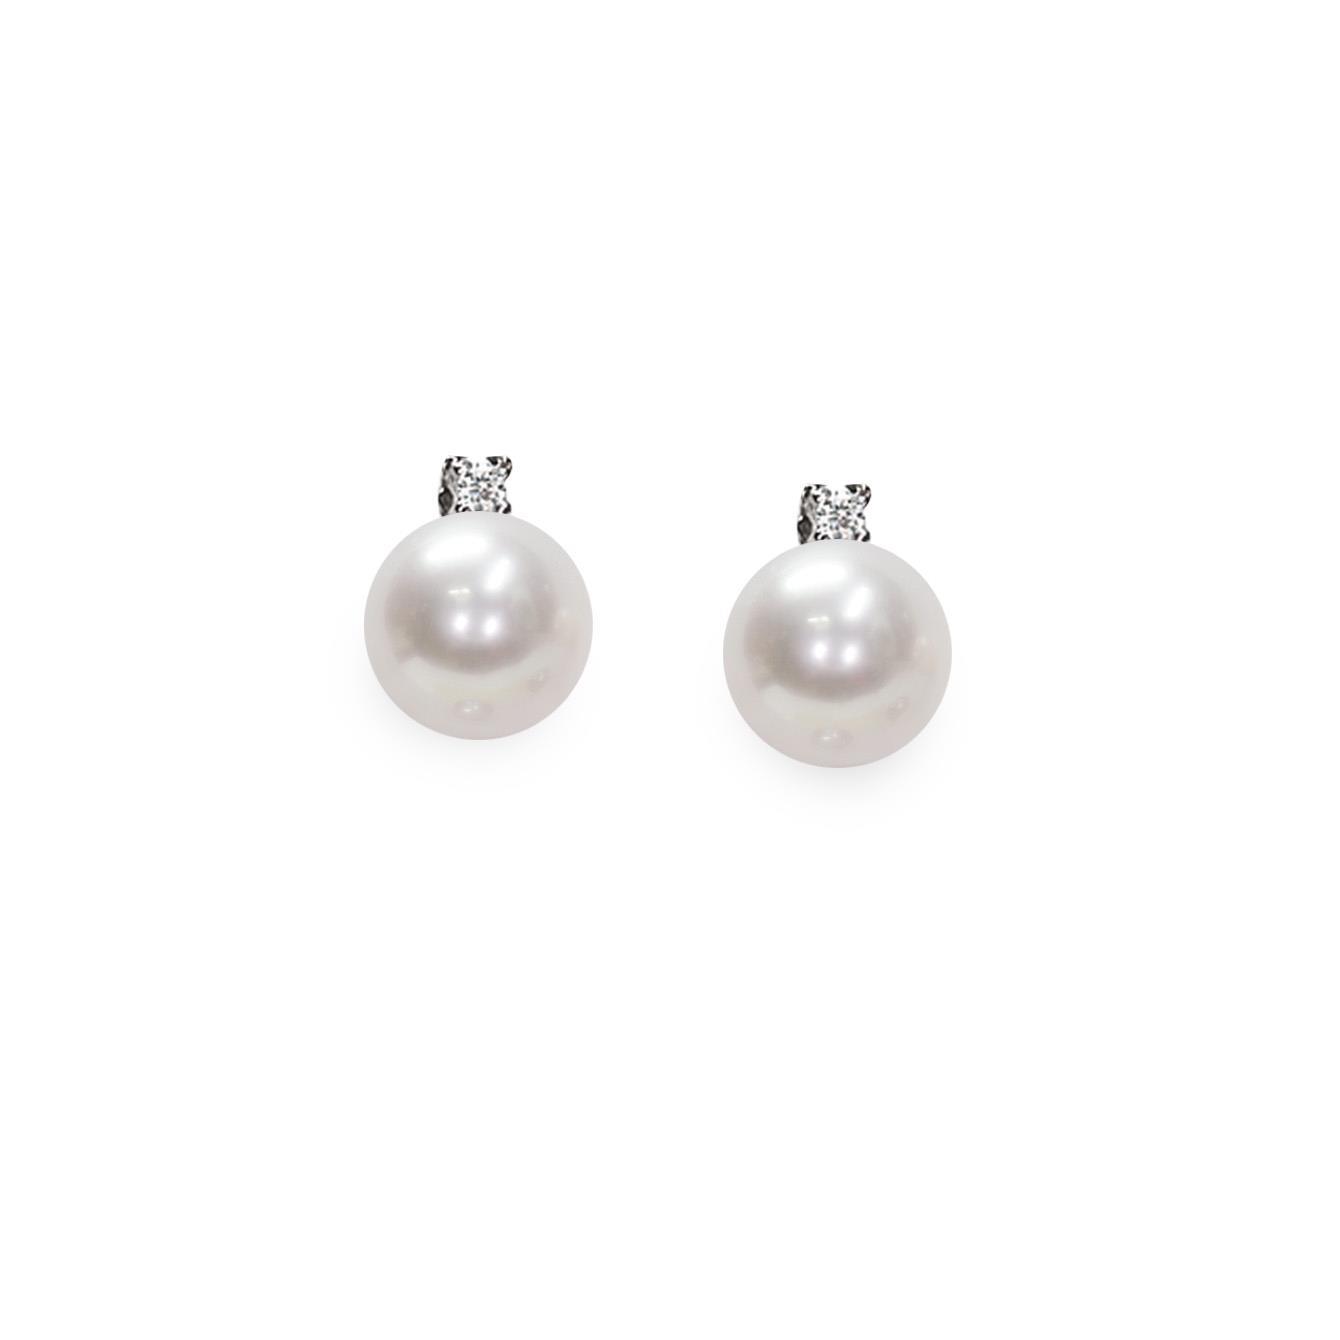 18 kt white gold earrings with full pearlescent pearl and diamonds - MAYUMI